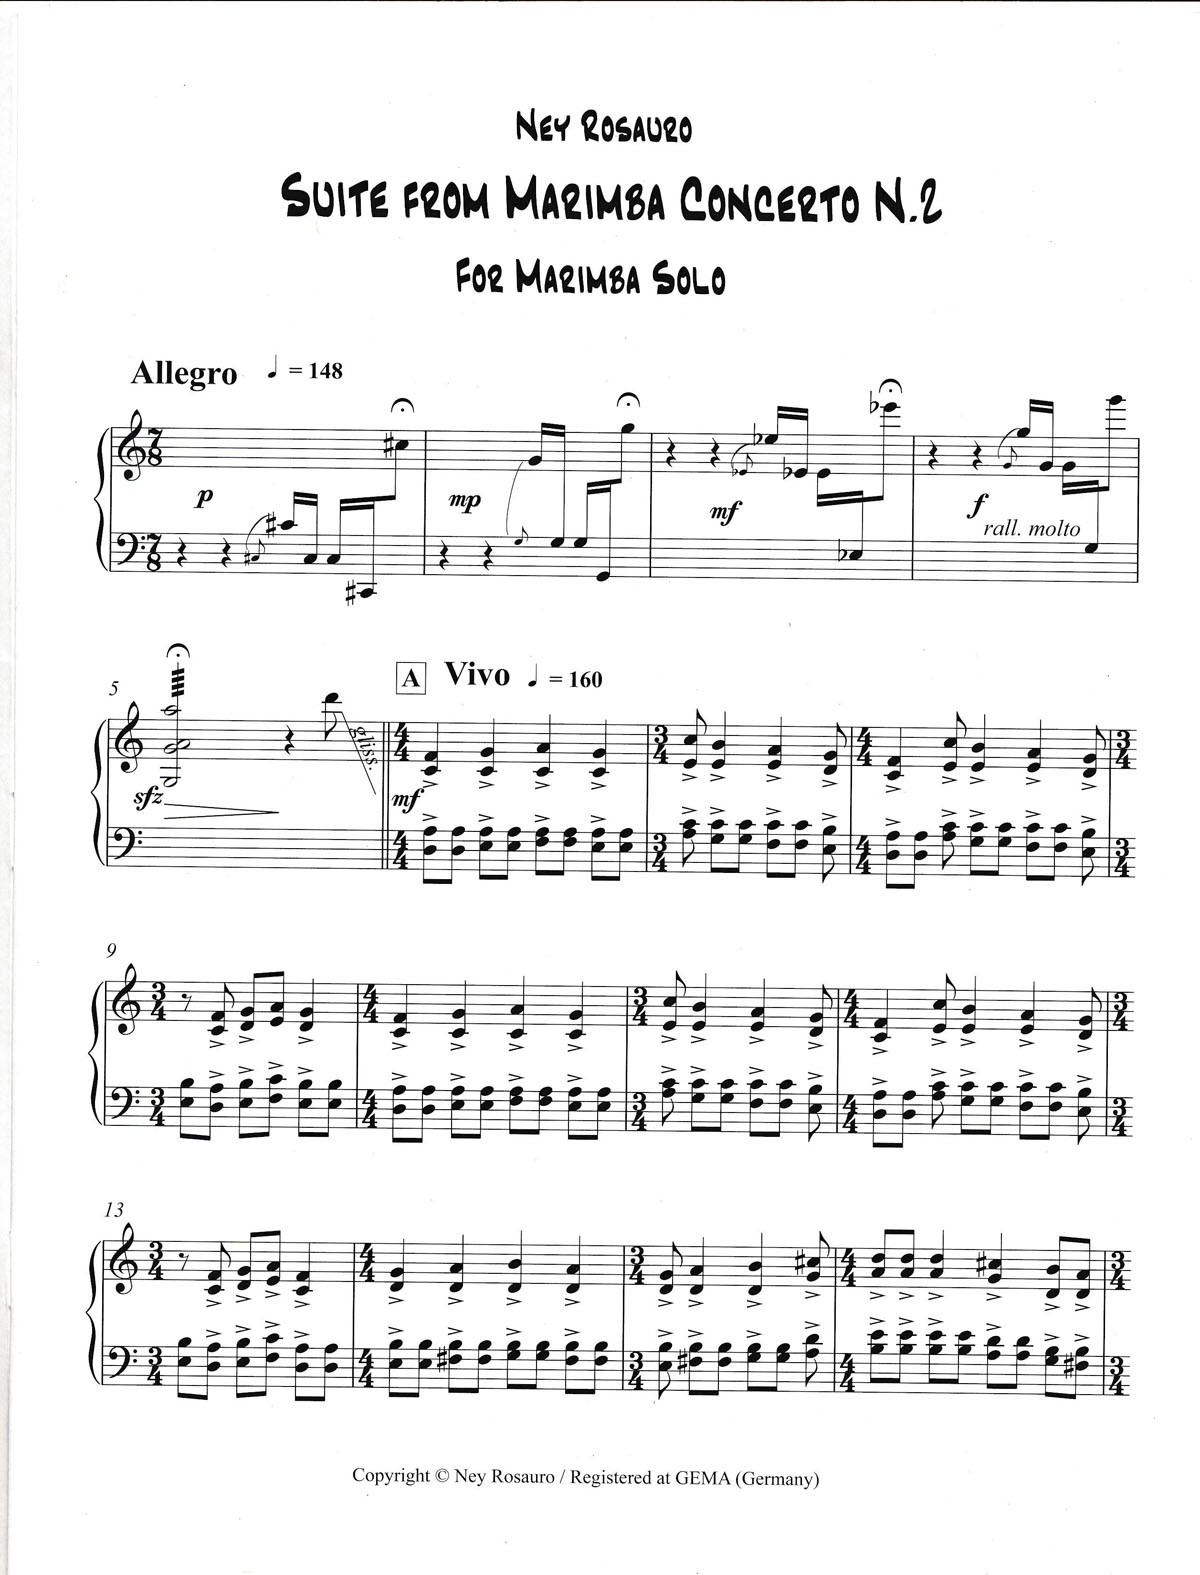 Suite from Marimba Concerto N.2